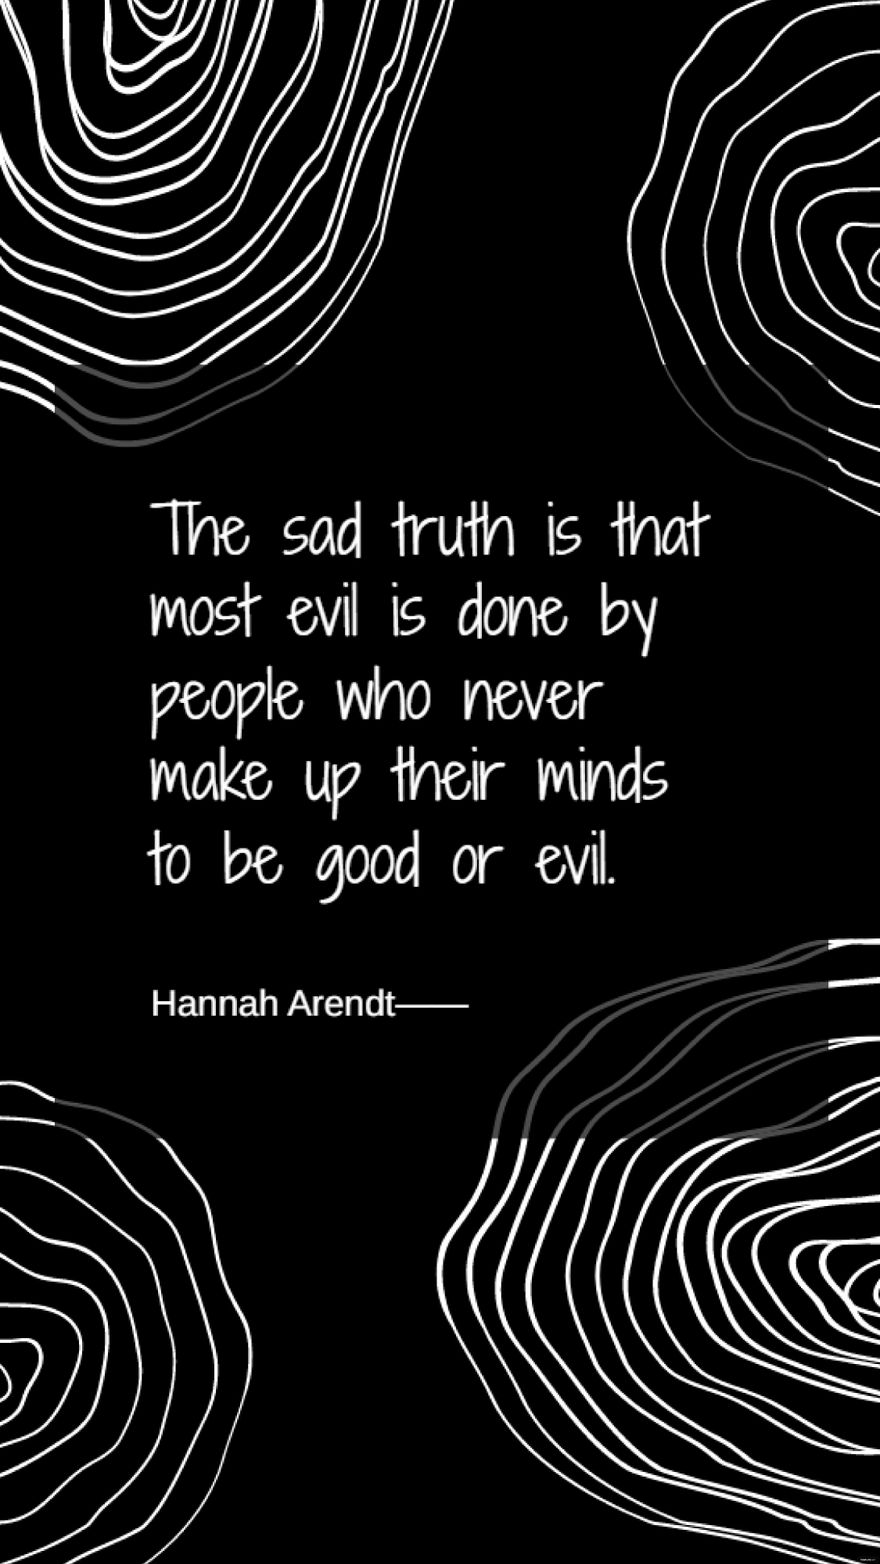 Hannah Arendt - The sad truth is that most evil is done by people who never make up their minds to be good or evil.